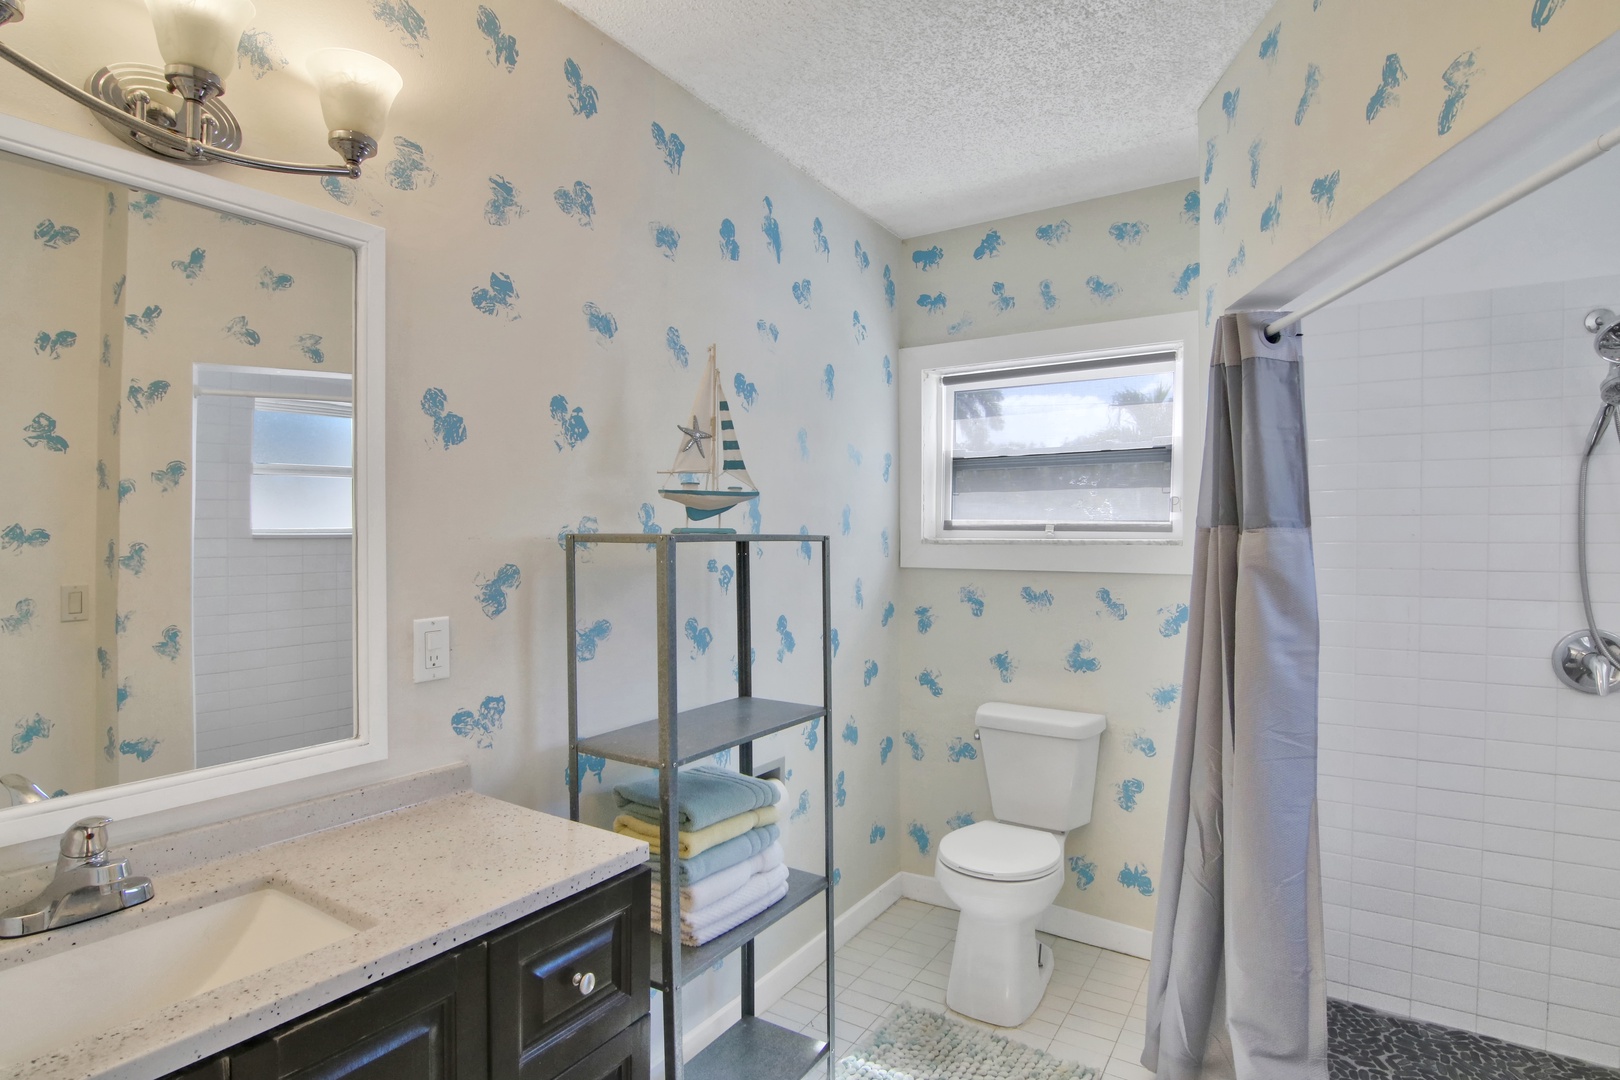 Unit 2: The final full bathroom offers a large vanity & walk-in shower